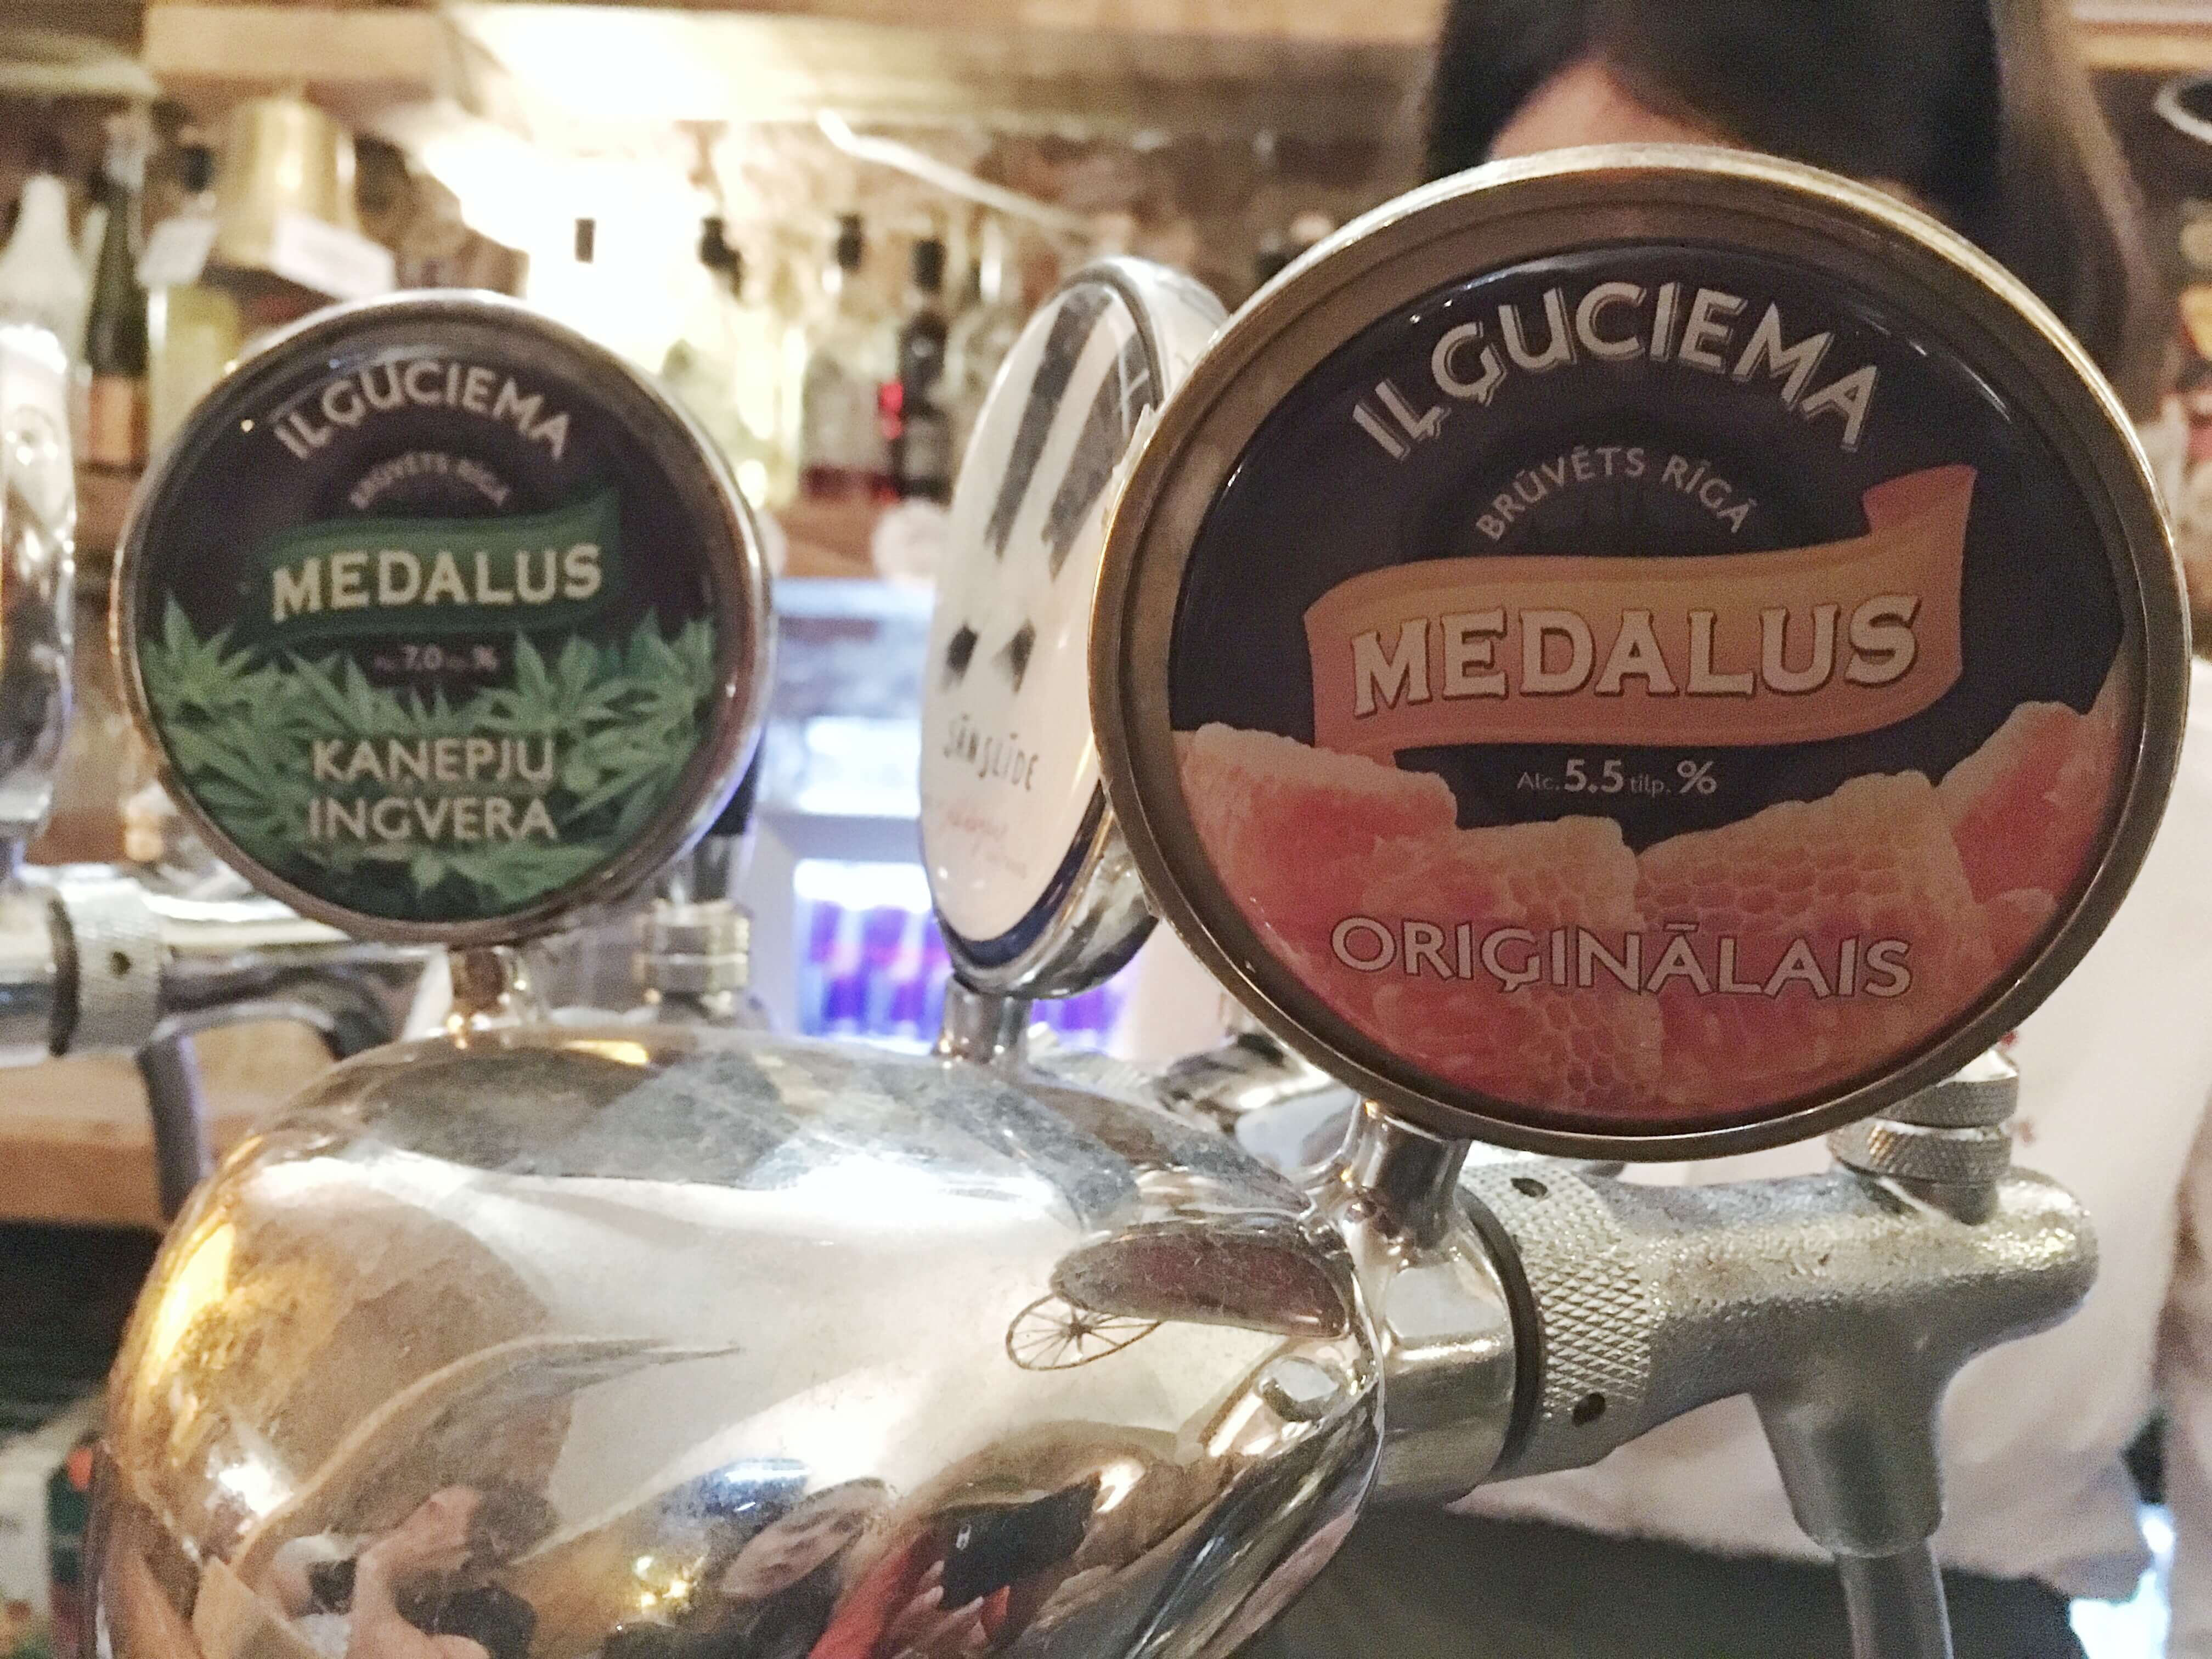 Taps: Medalus hemp and ginger beer and Medalus mead/honey beer